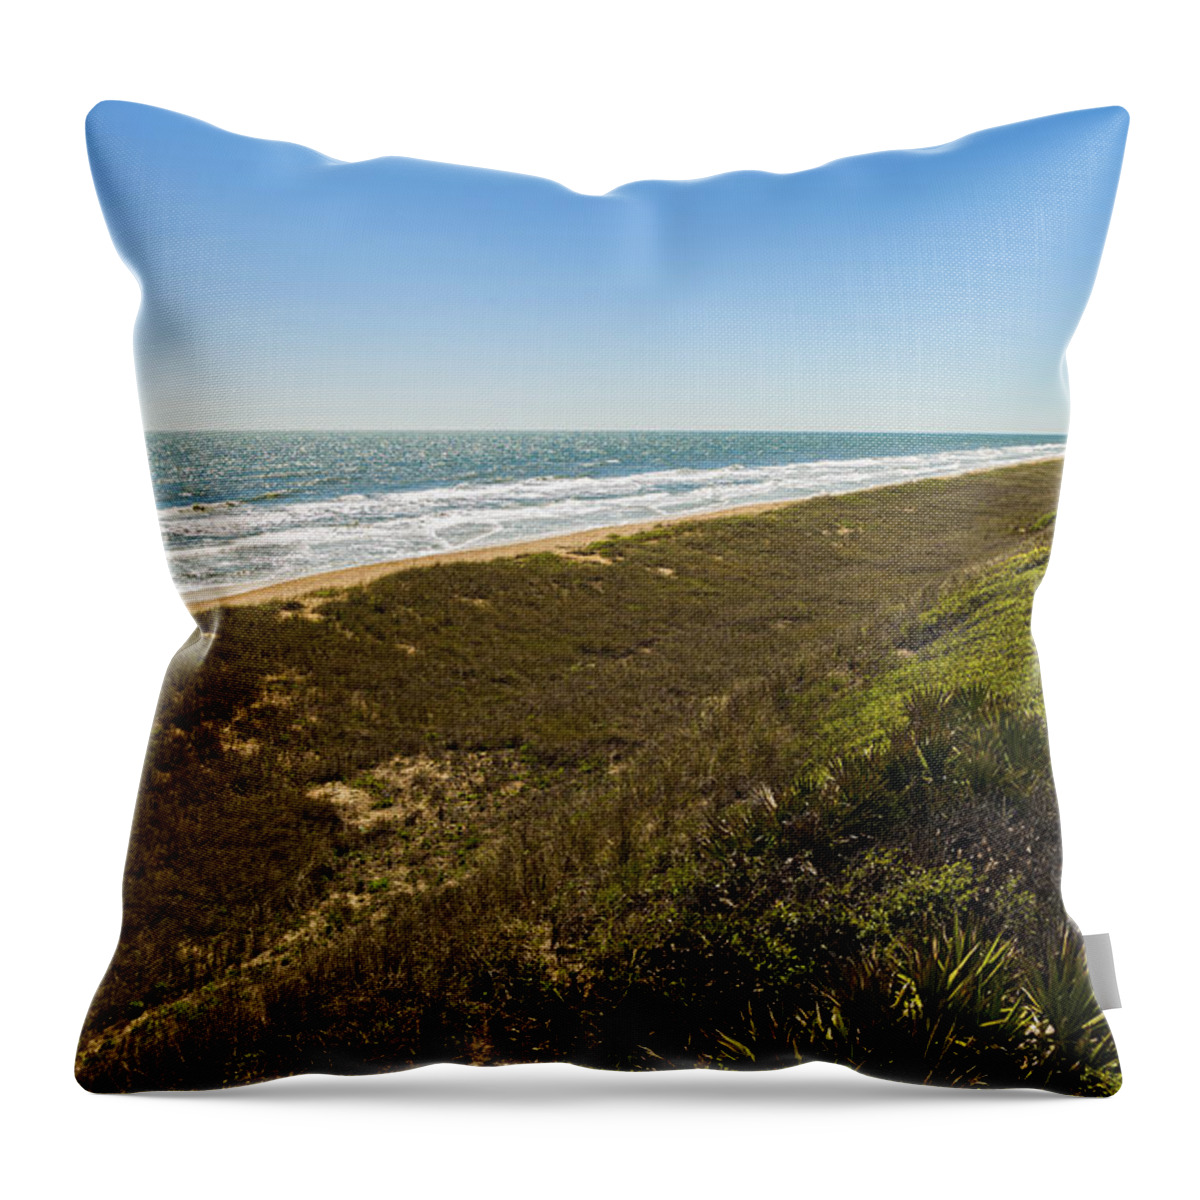 Atlantic Ocean Throw Pillow featuring the photograph Ponte Vedra Beach by Raul Rodriguez